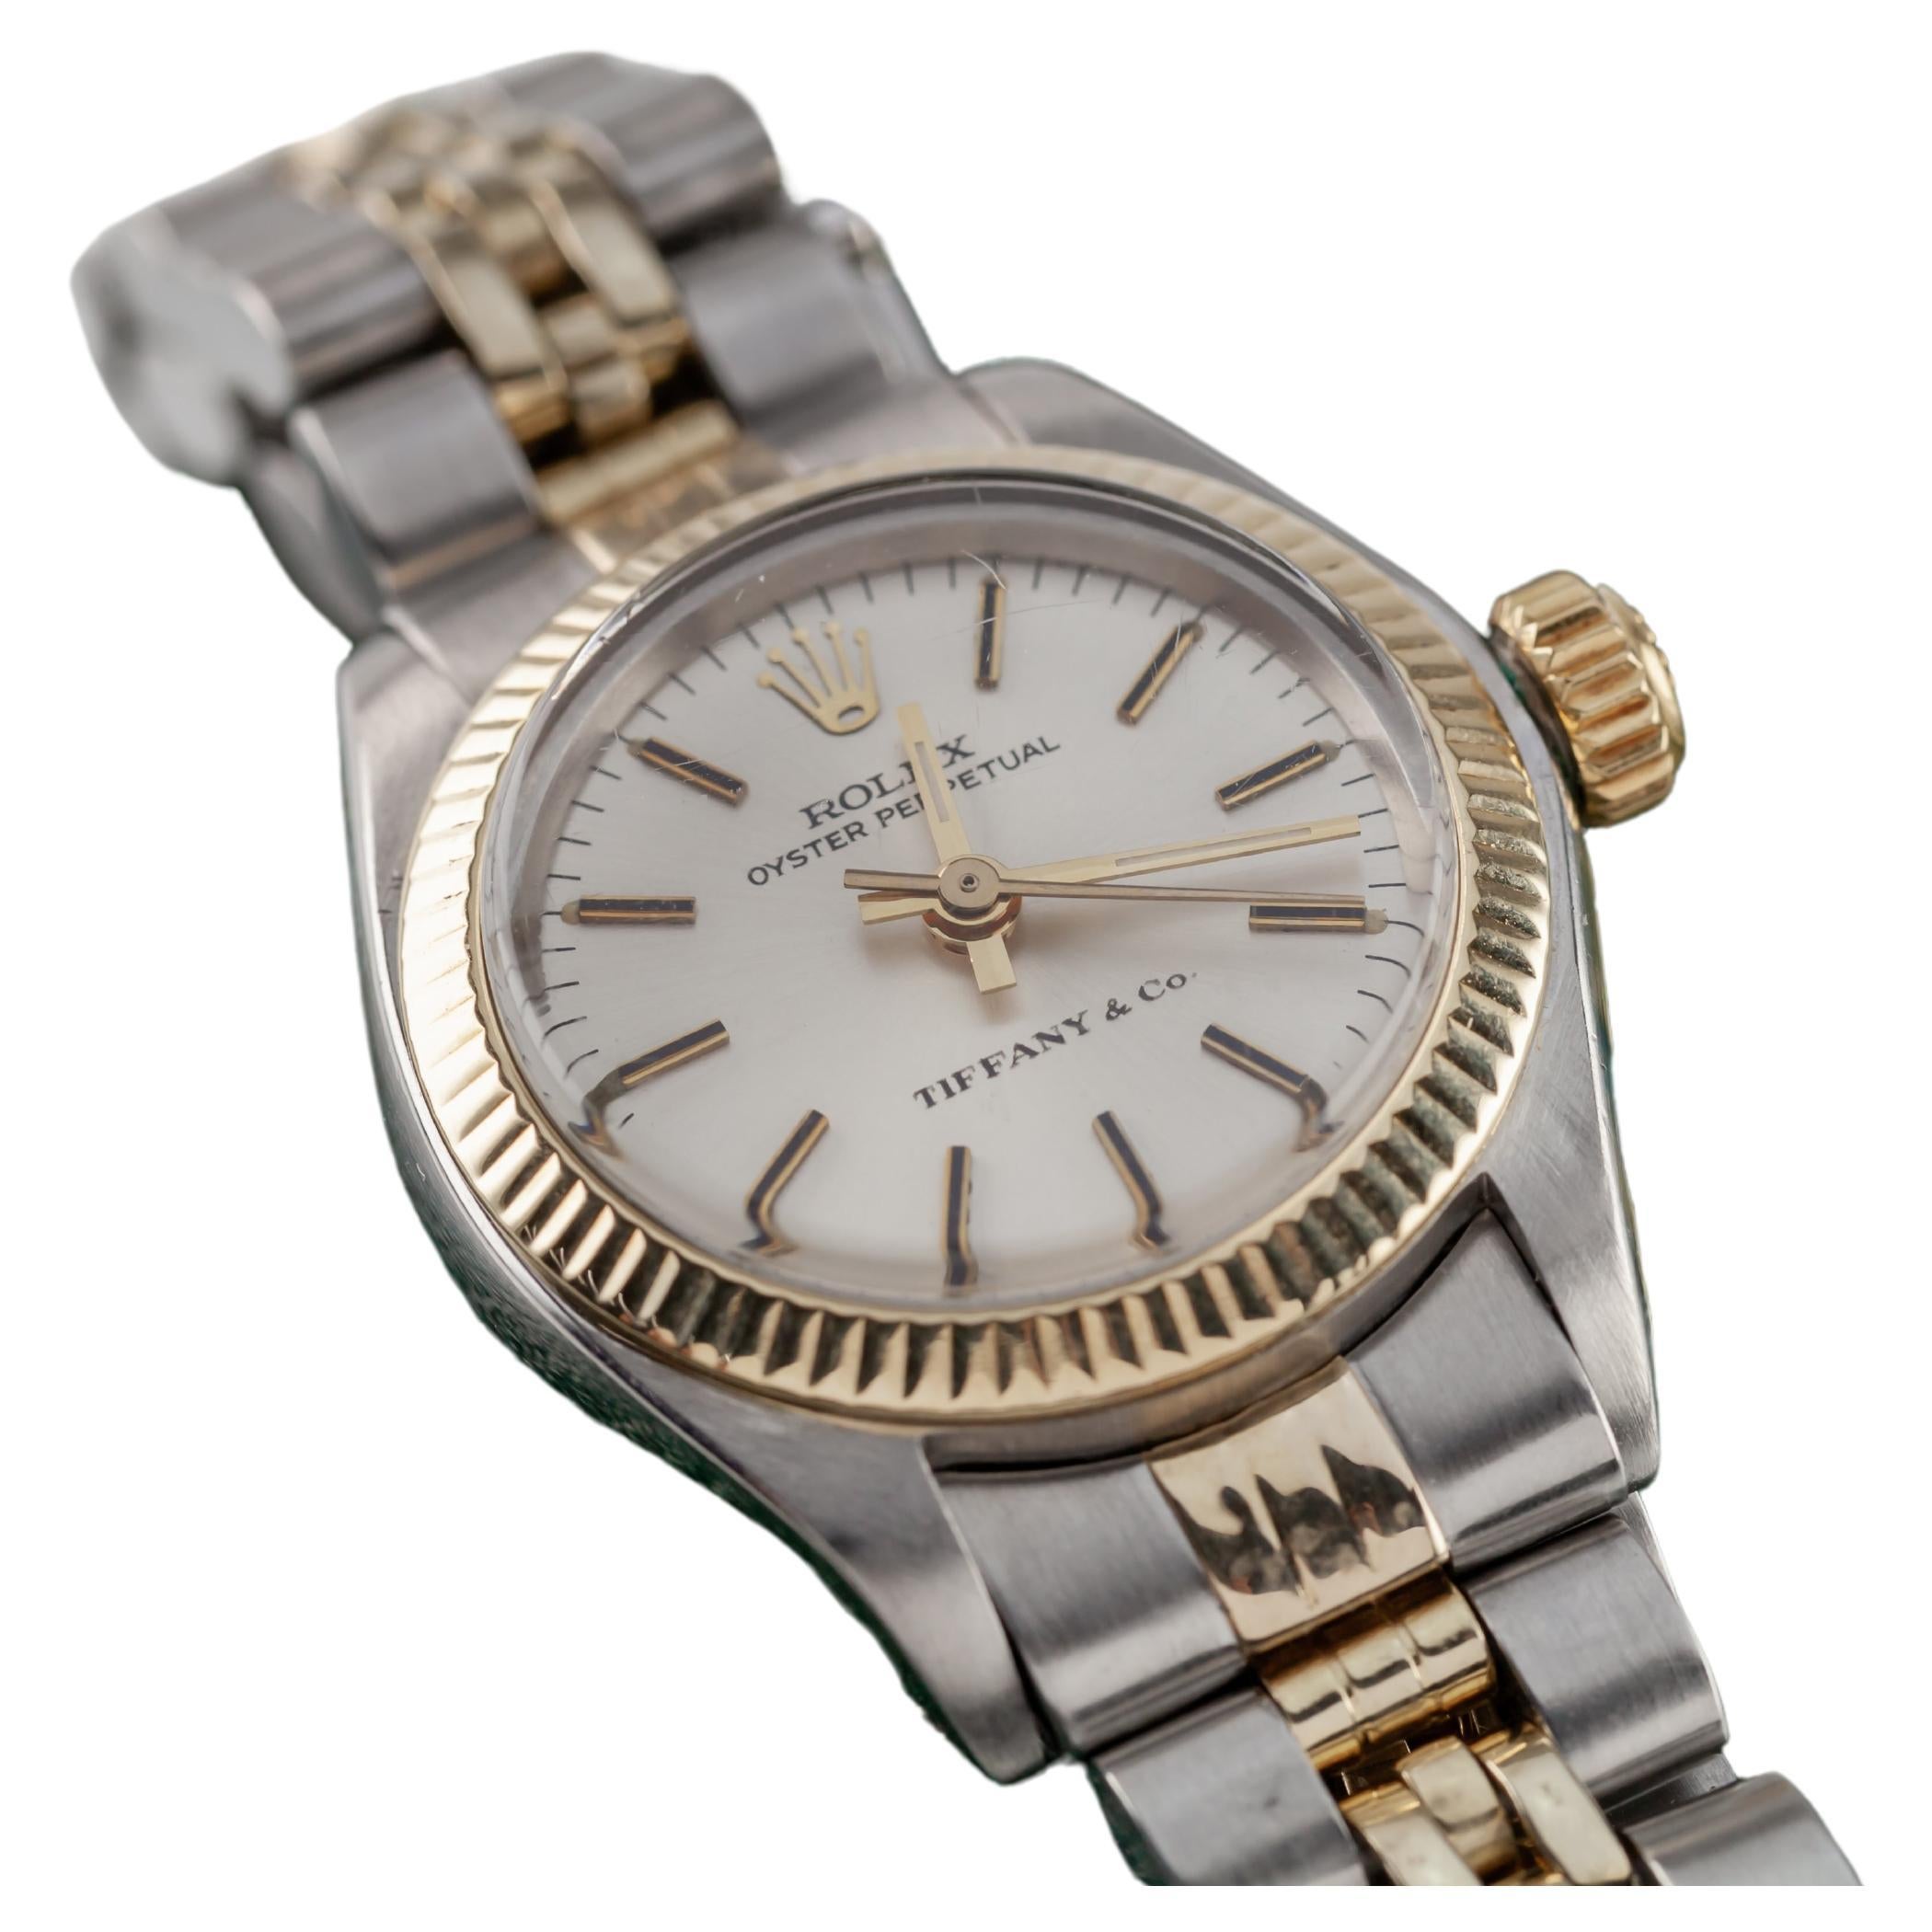 Rolex Two-Tone Stainless Steel and Gold Women's Datejust w/ Box 6917 Tiffany & Co.
Model: Datejust
Model #6719
Serial #3692XXX
Movement #2030
Movement Serial #949XX
Year: 1974

Stainless Steel Case w/ Fluted Gold Bezel
26 mm in Diameter
Lug-to-Lug